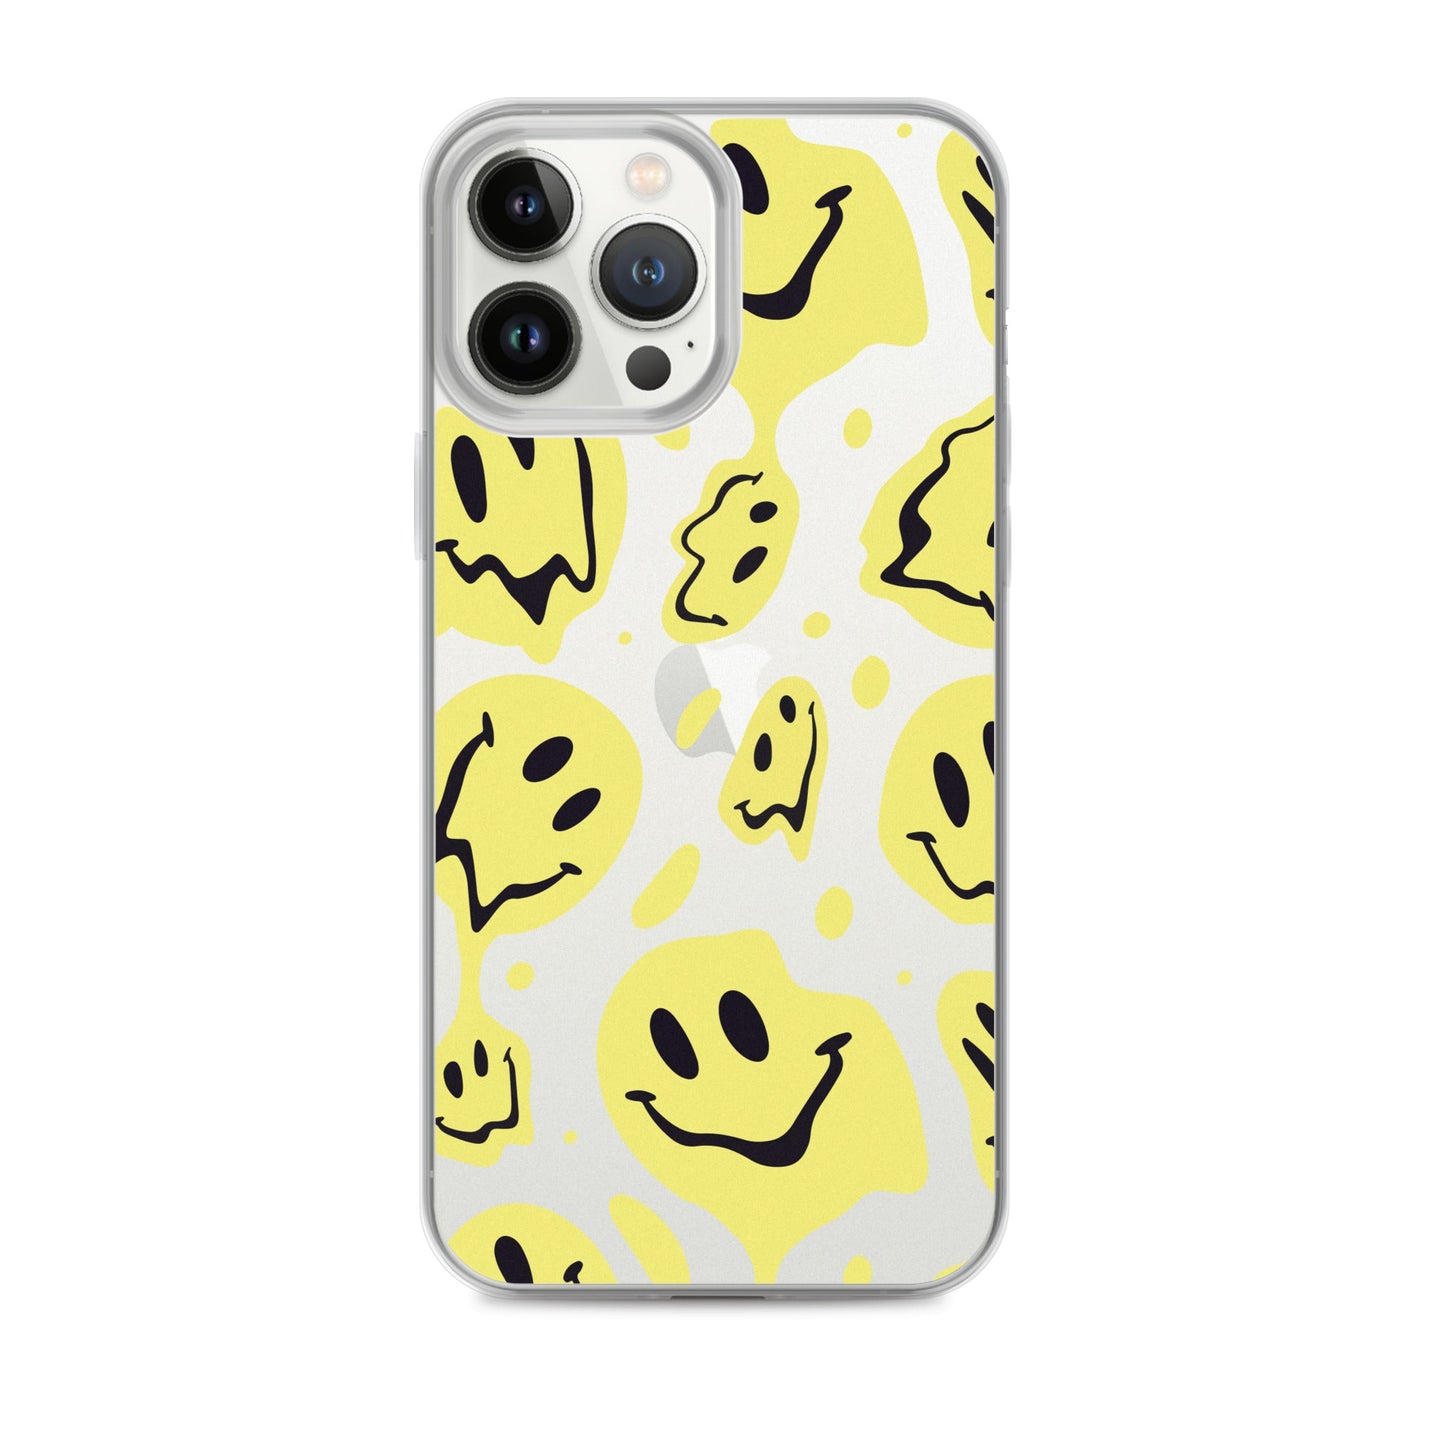 Distorted Yellow Smiling Faces iPhone Case